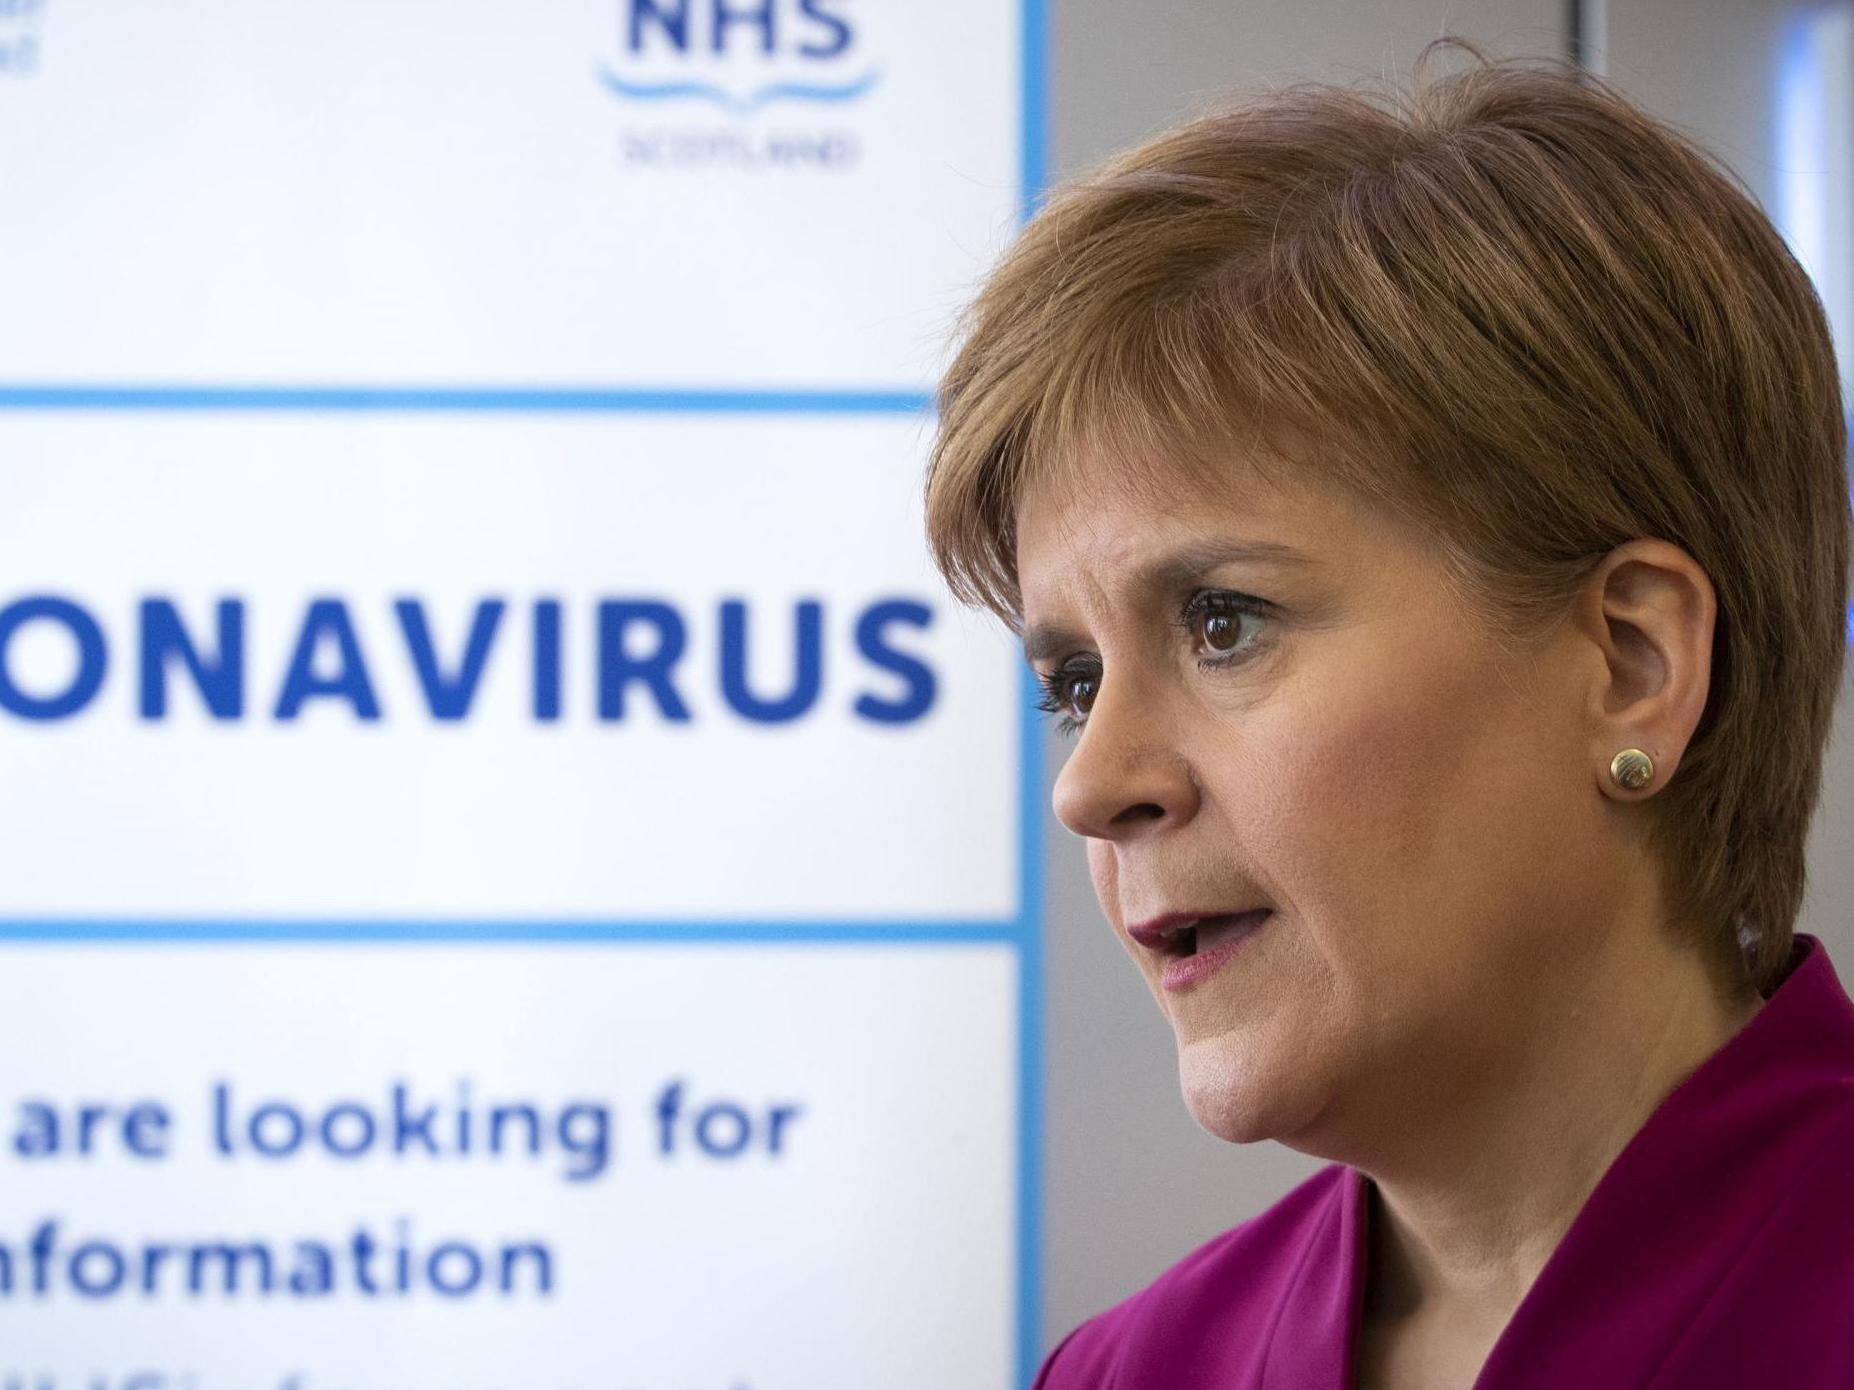 Nicola Sturgeon has seen surge of support for Scottish independence during the pandemic